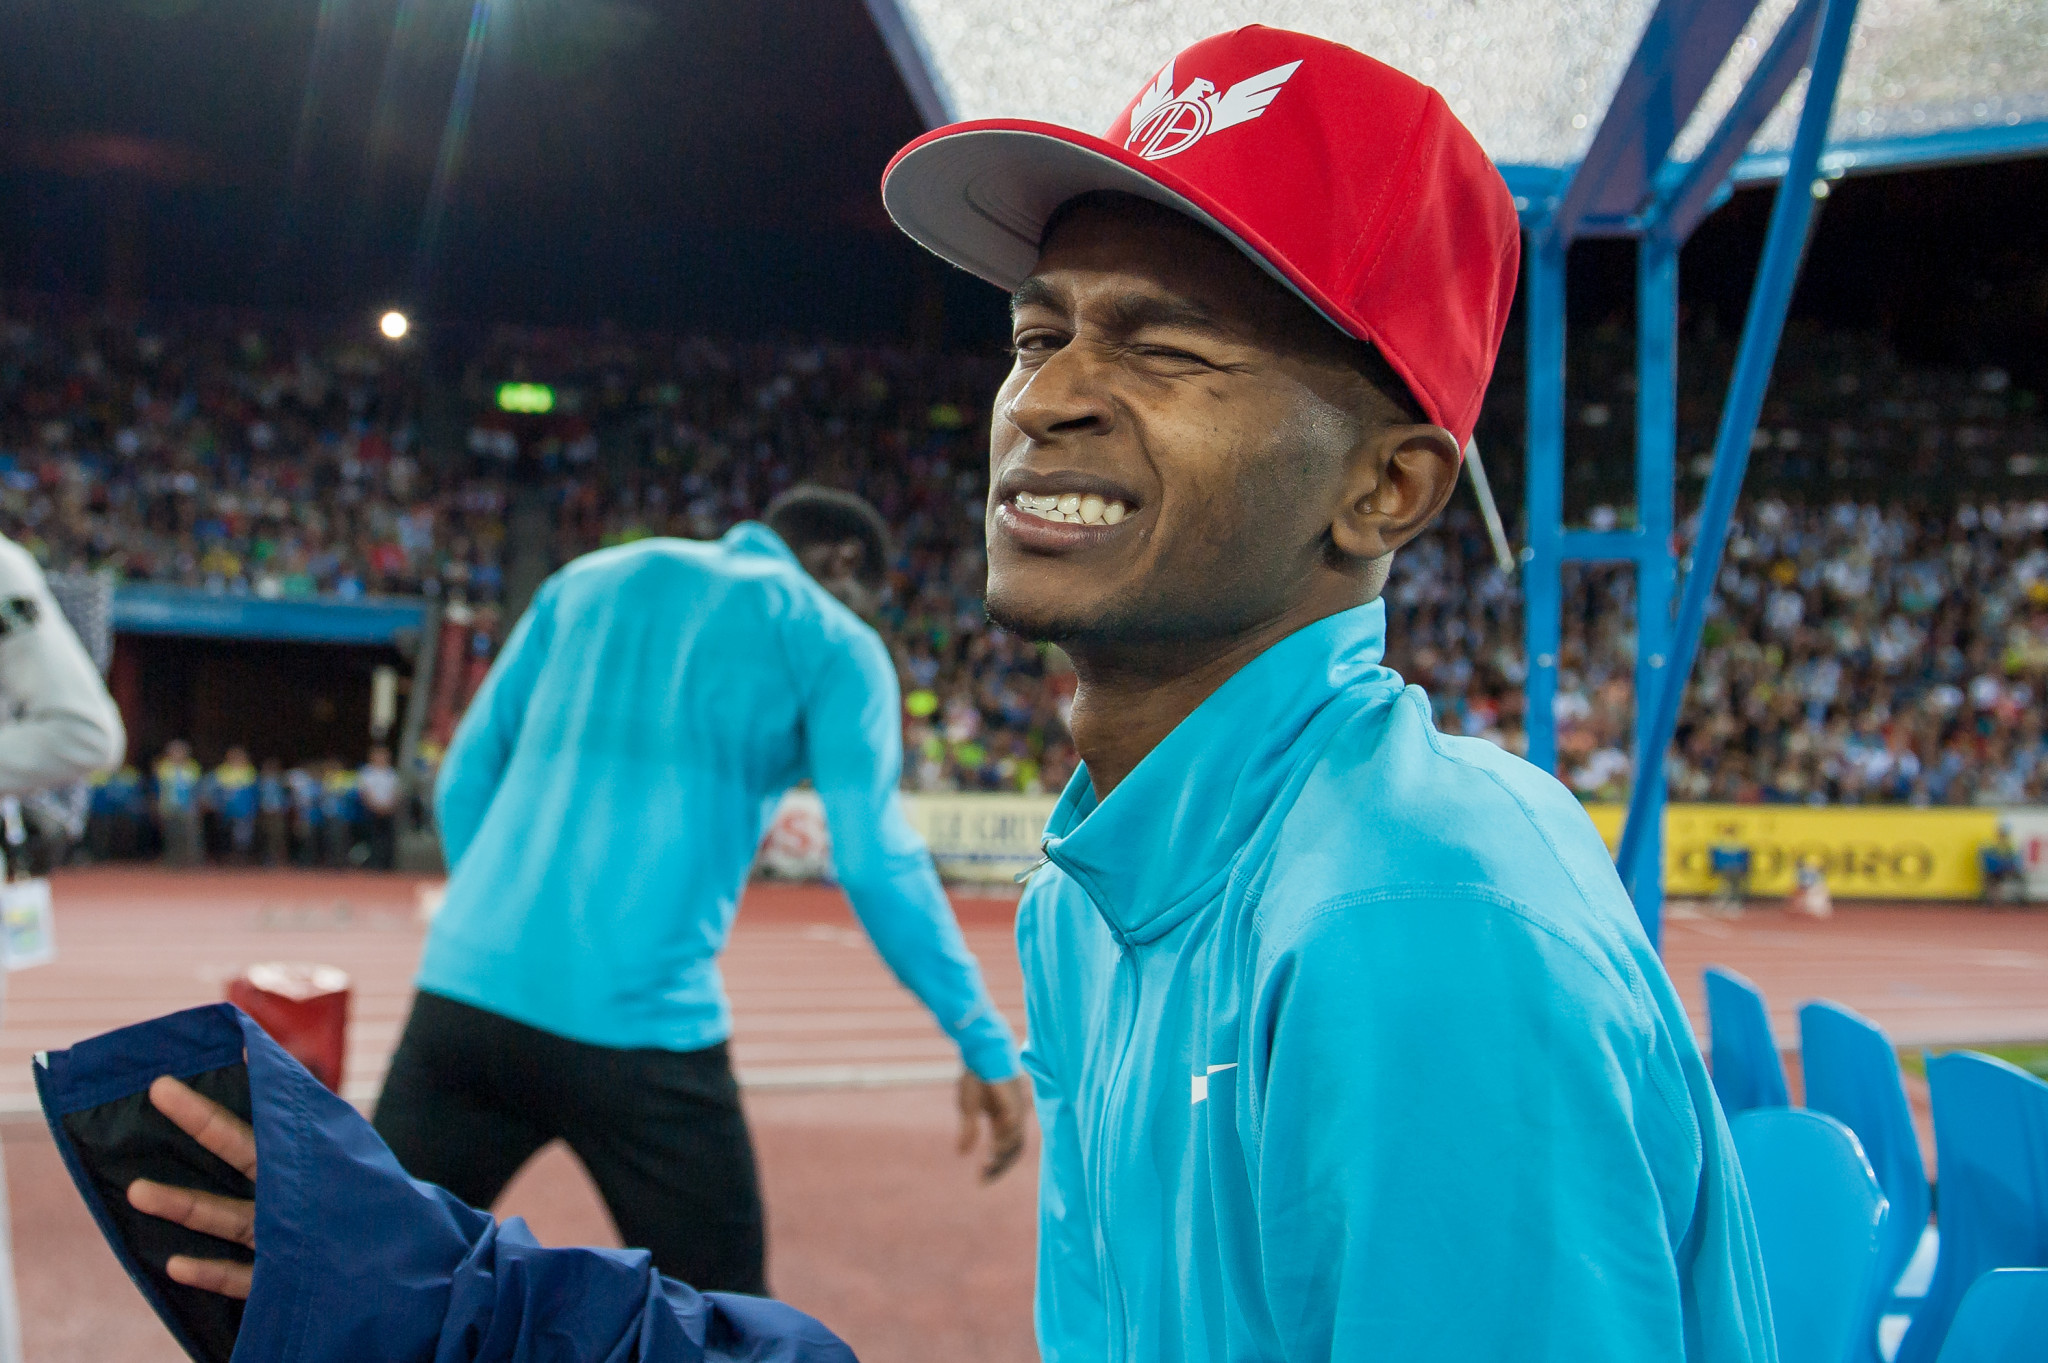 Barshim and Rohler have world records on their minds with 2018 IAAF Diamond League set to start in Doha